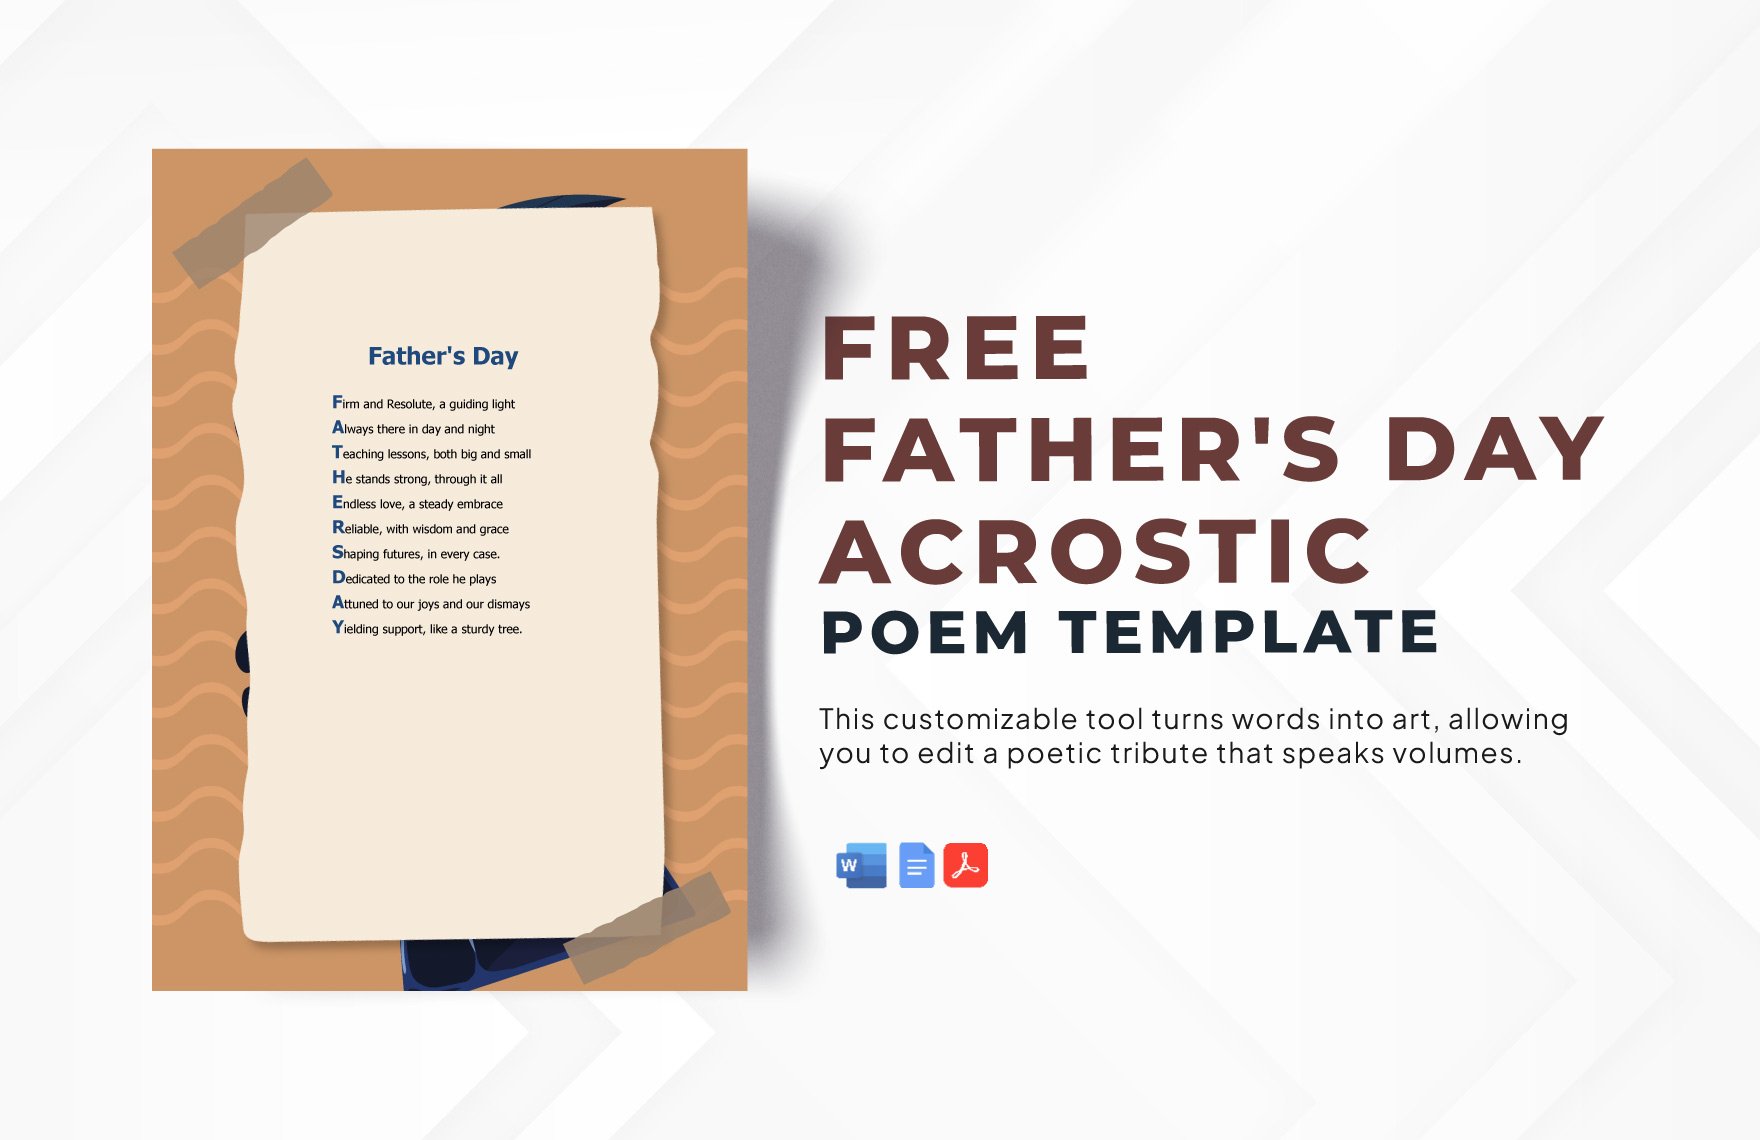 Father's Day Acrostic Poem Template